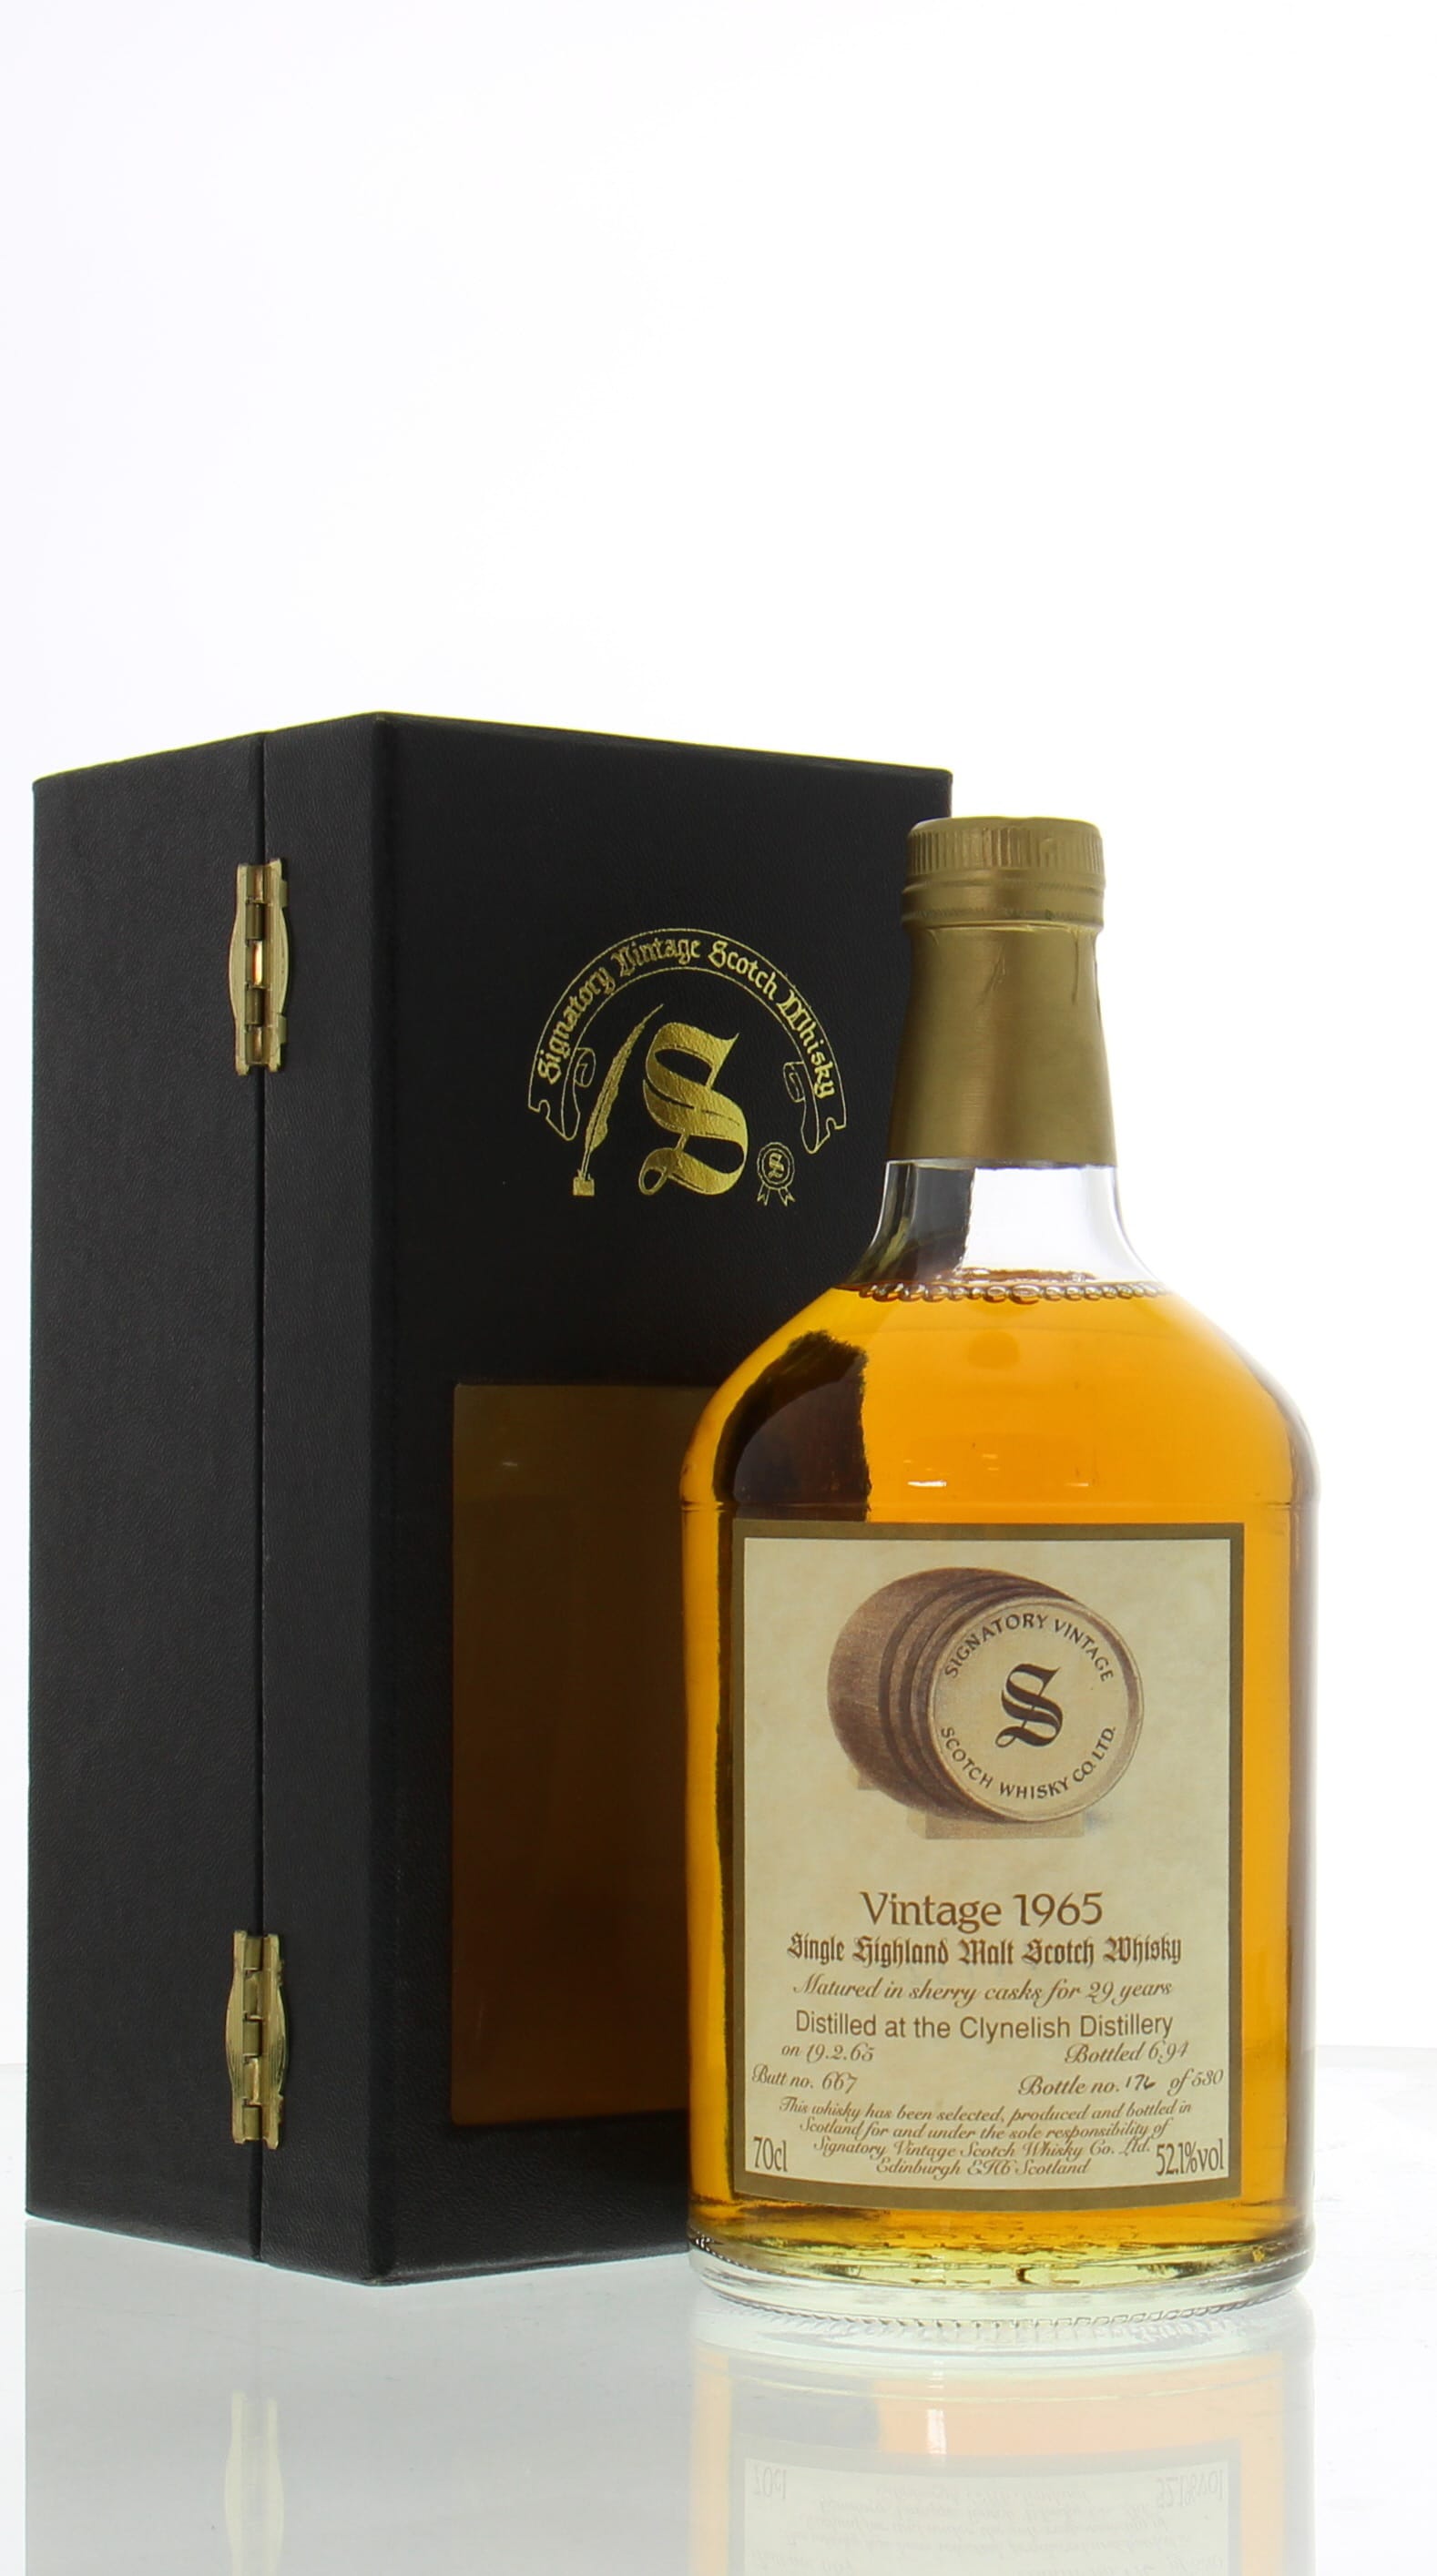 Clynelish - 29 Years Old Signatory Vintage Dumpy Cask:667 52.1% 1965 In Original Container